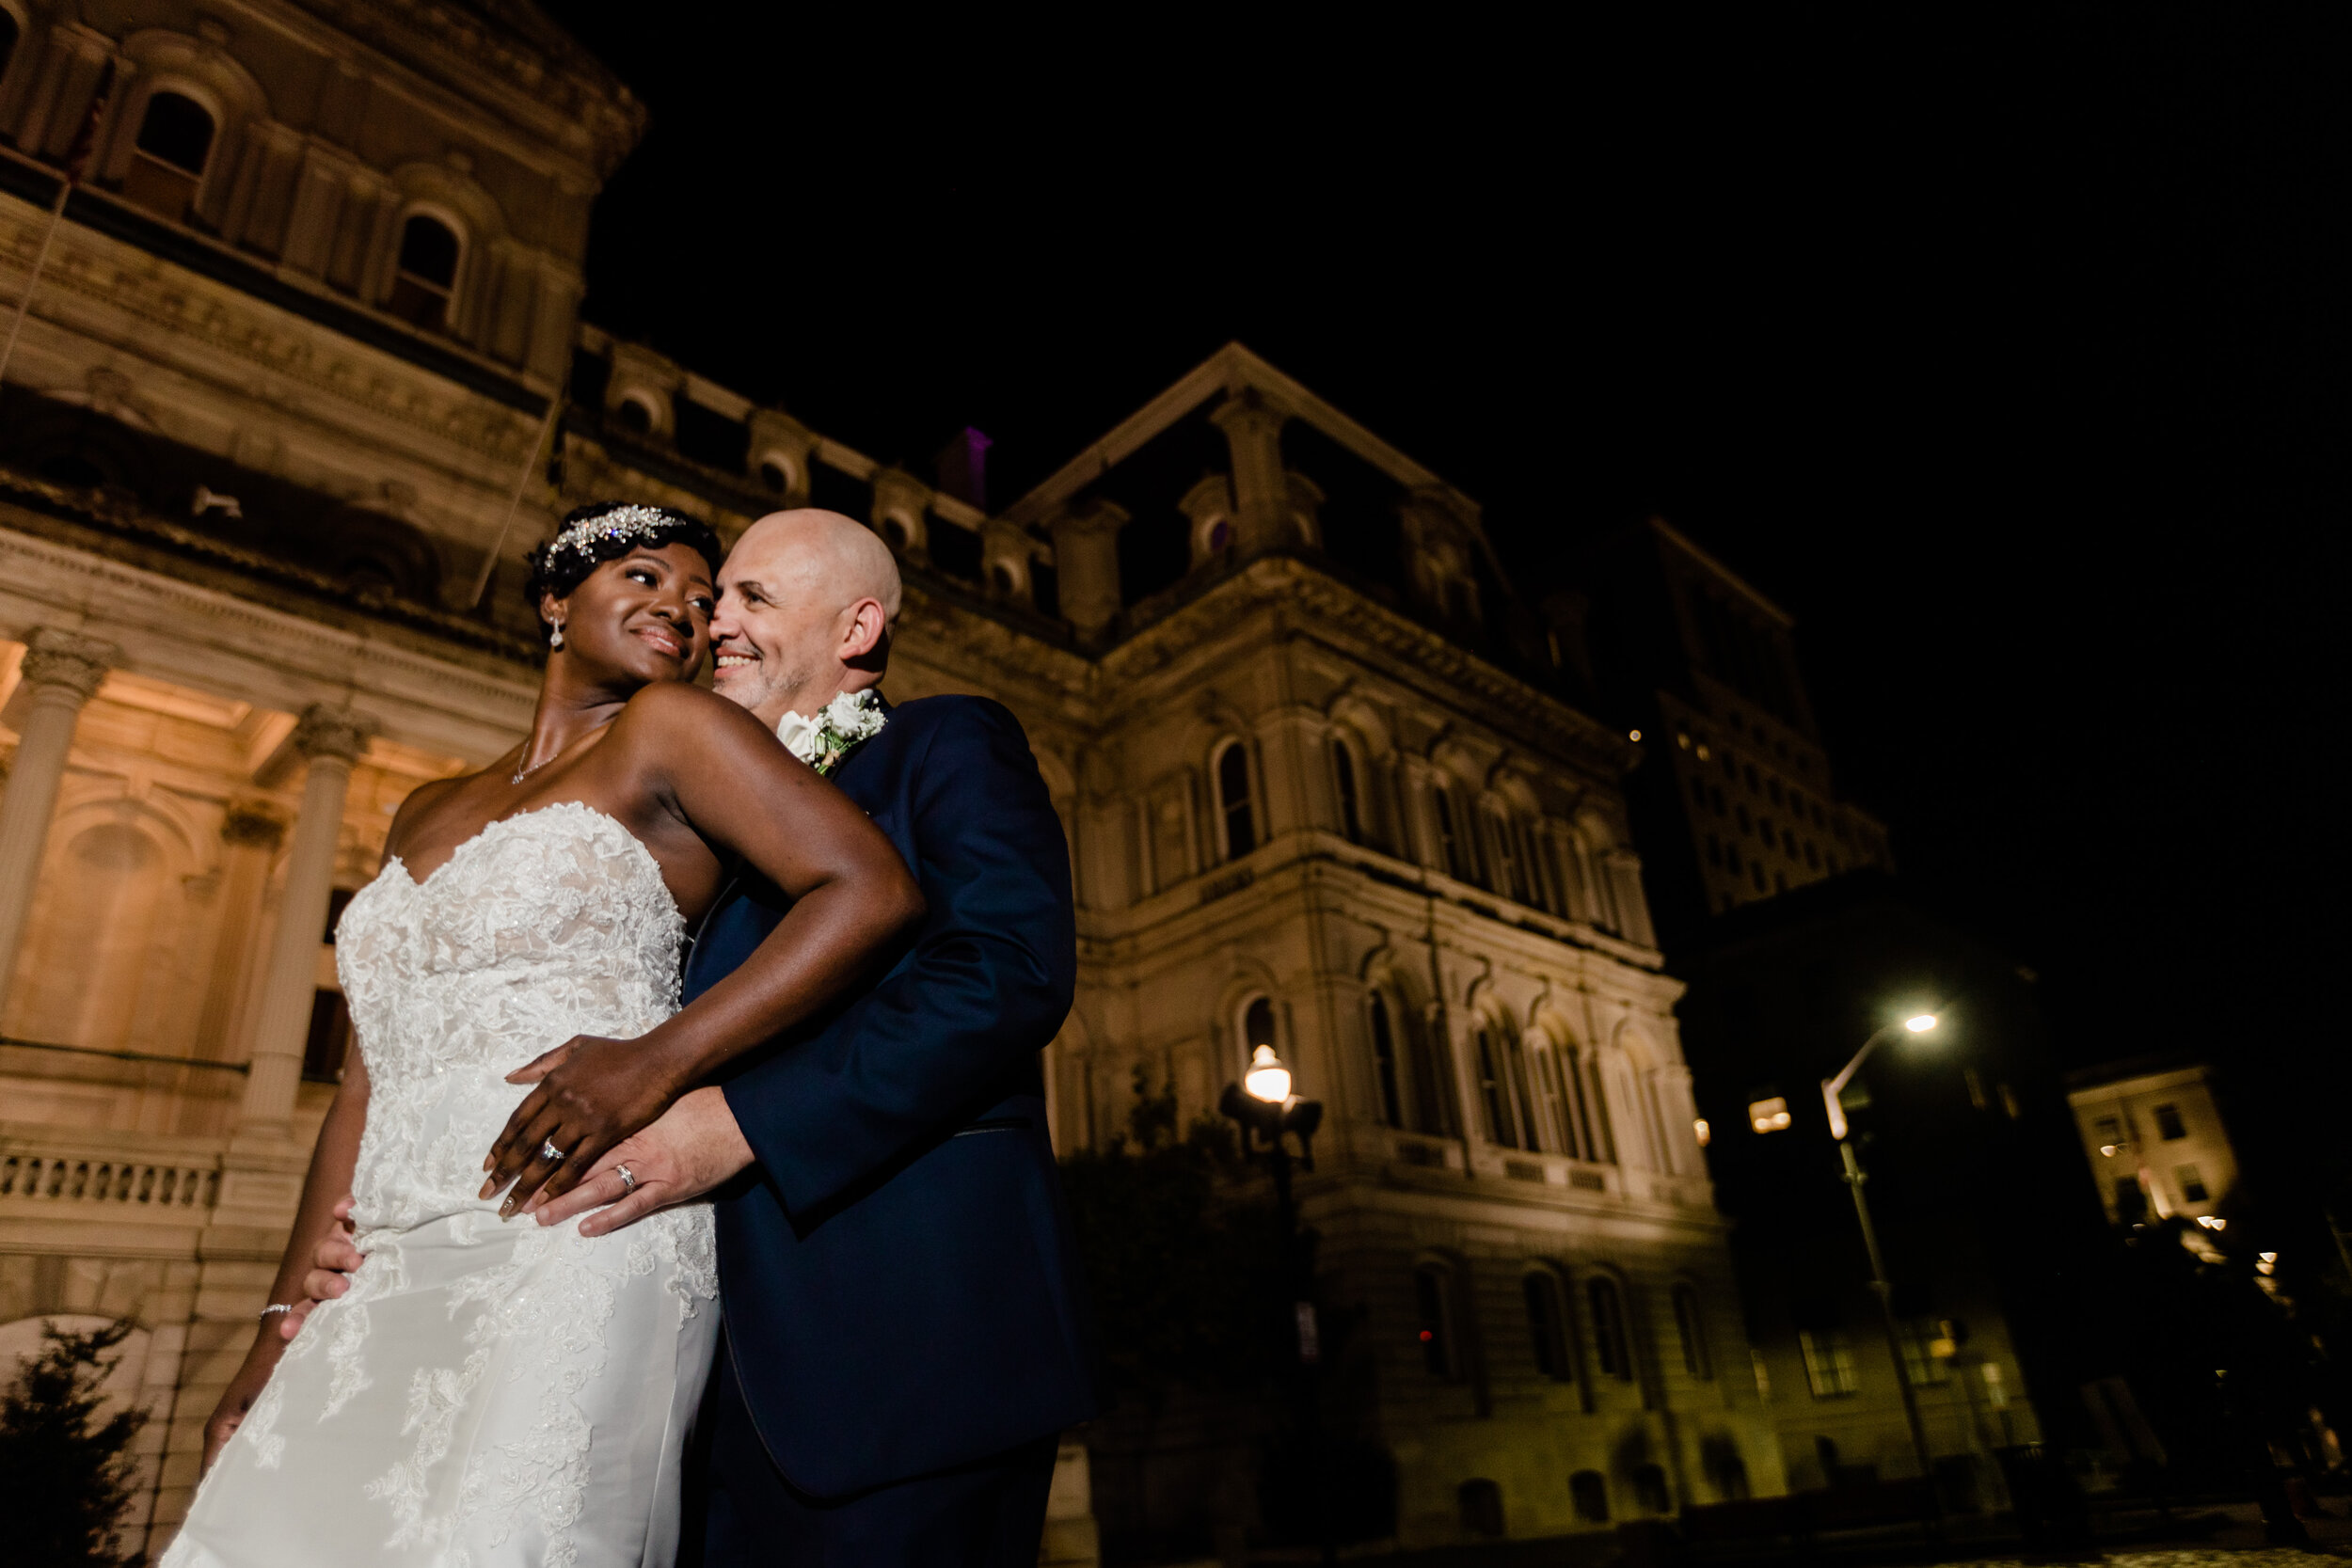 get married in baltimore city hall shot by megapixels media biracial couple wedding photographers maryland-100.jpg